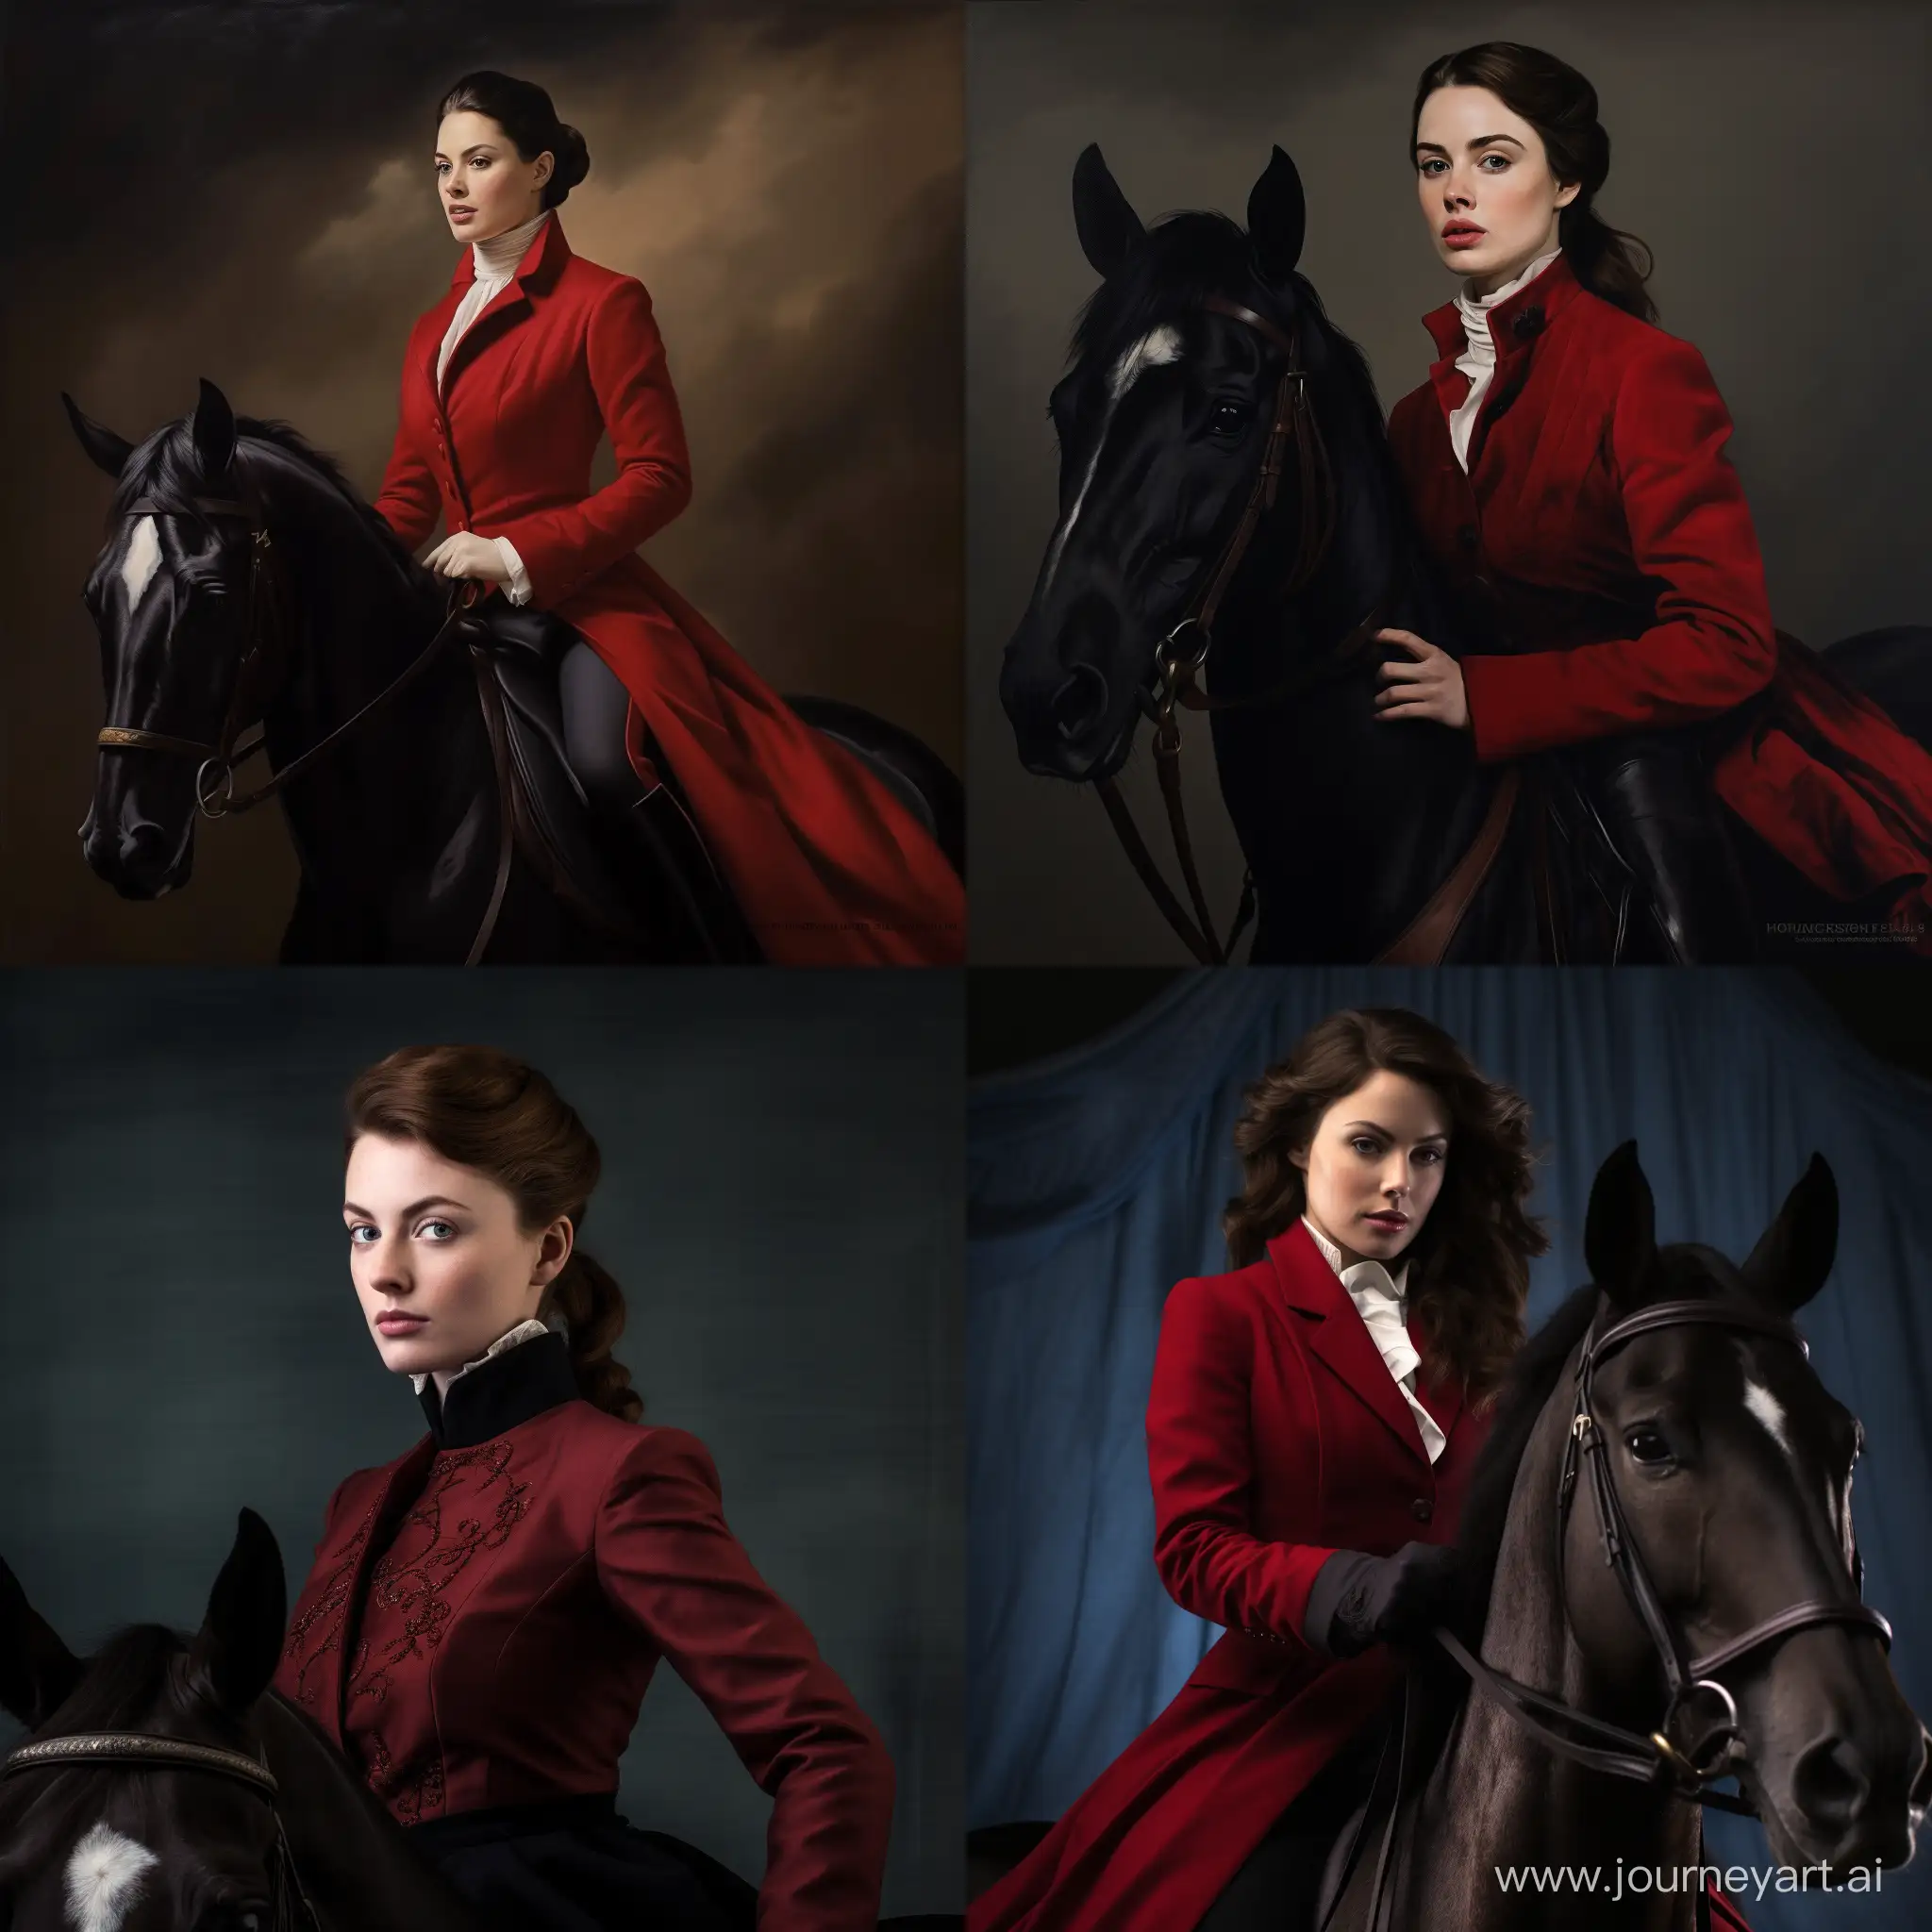 A Fairly beautiful and handsome woman with pale skin, great posture is riding a dark bay English thoroughbred. She is wearing a red velvet riding jacket that is a combination of modern ones with 19th century style